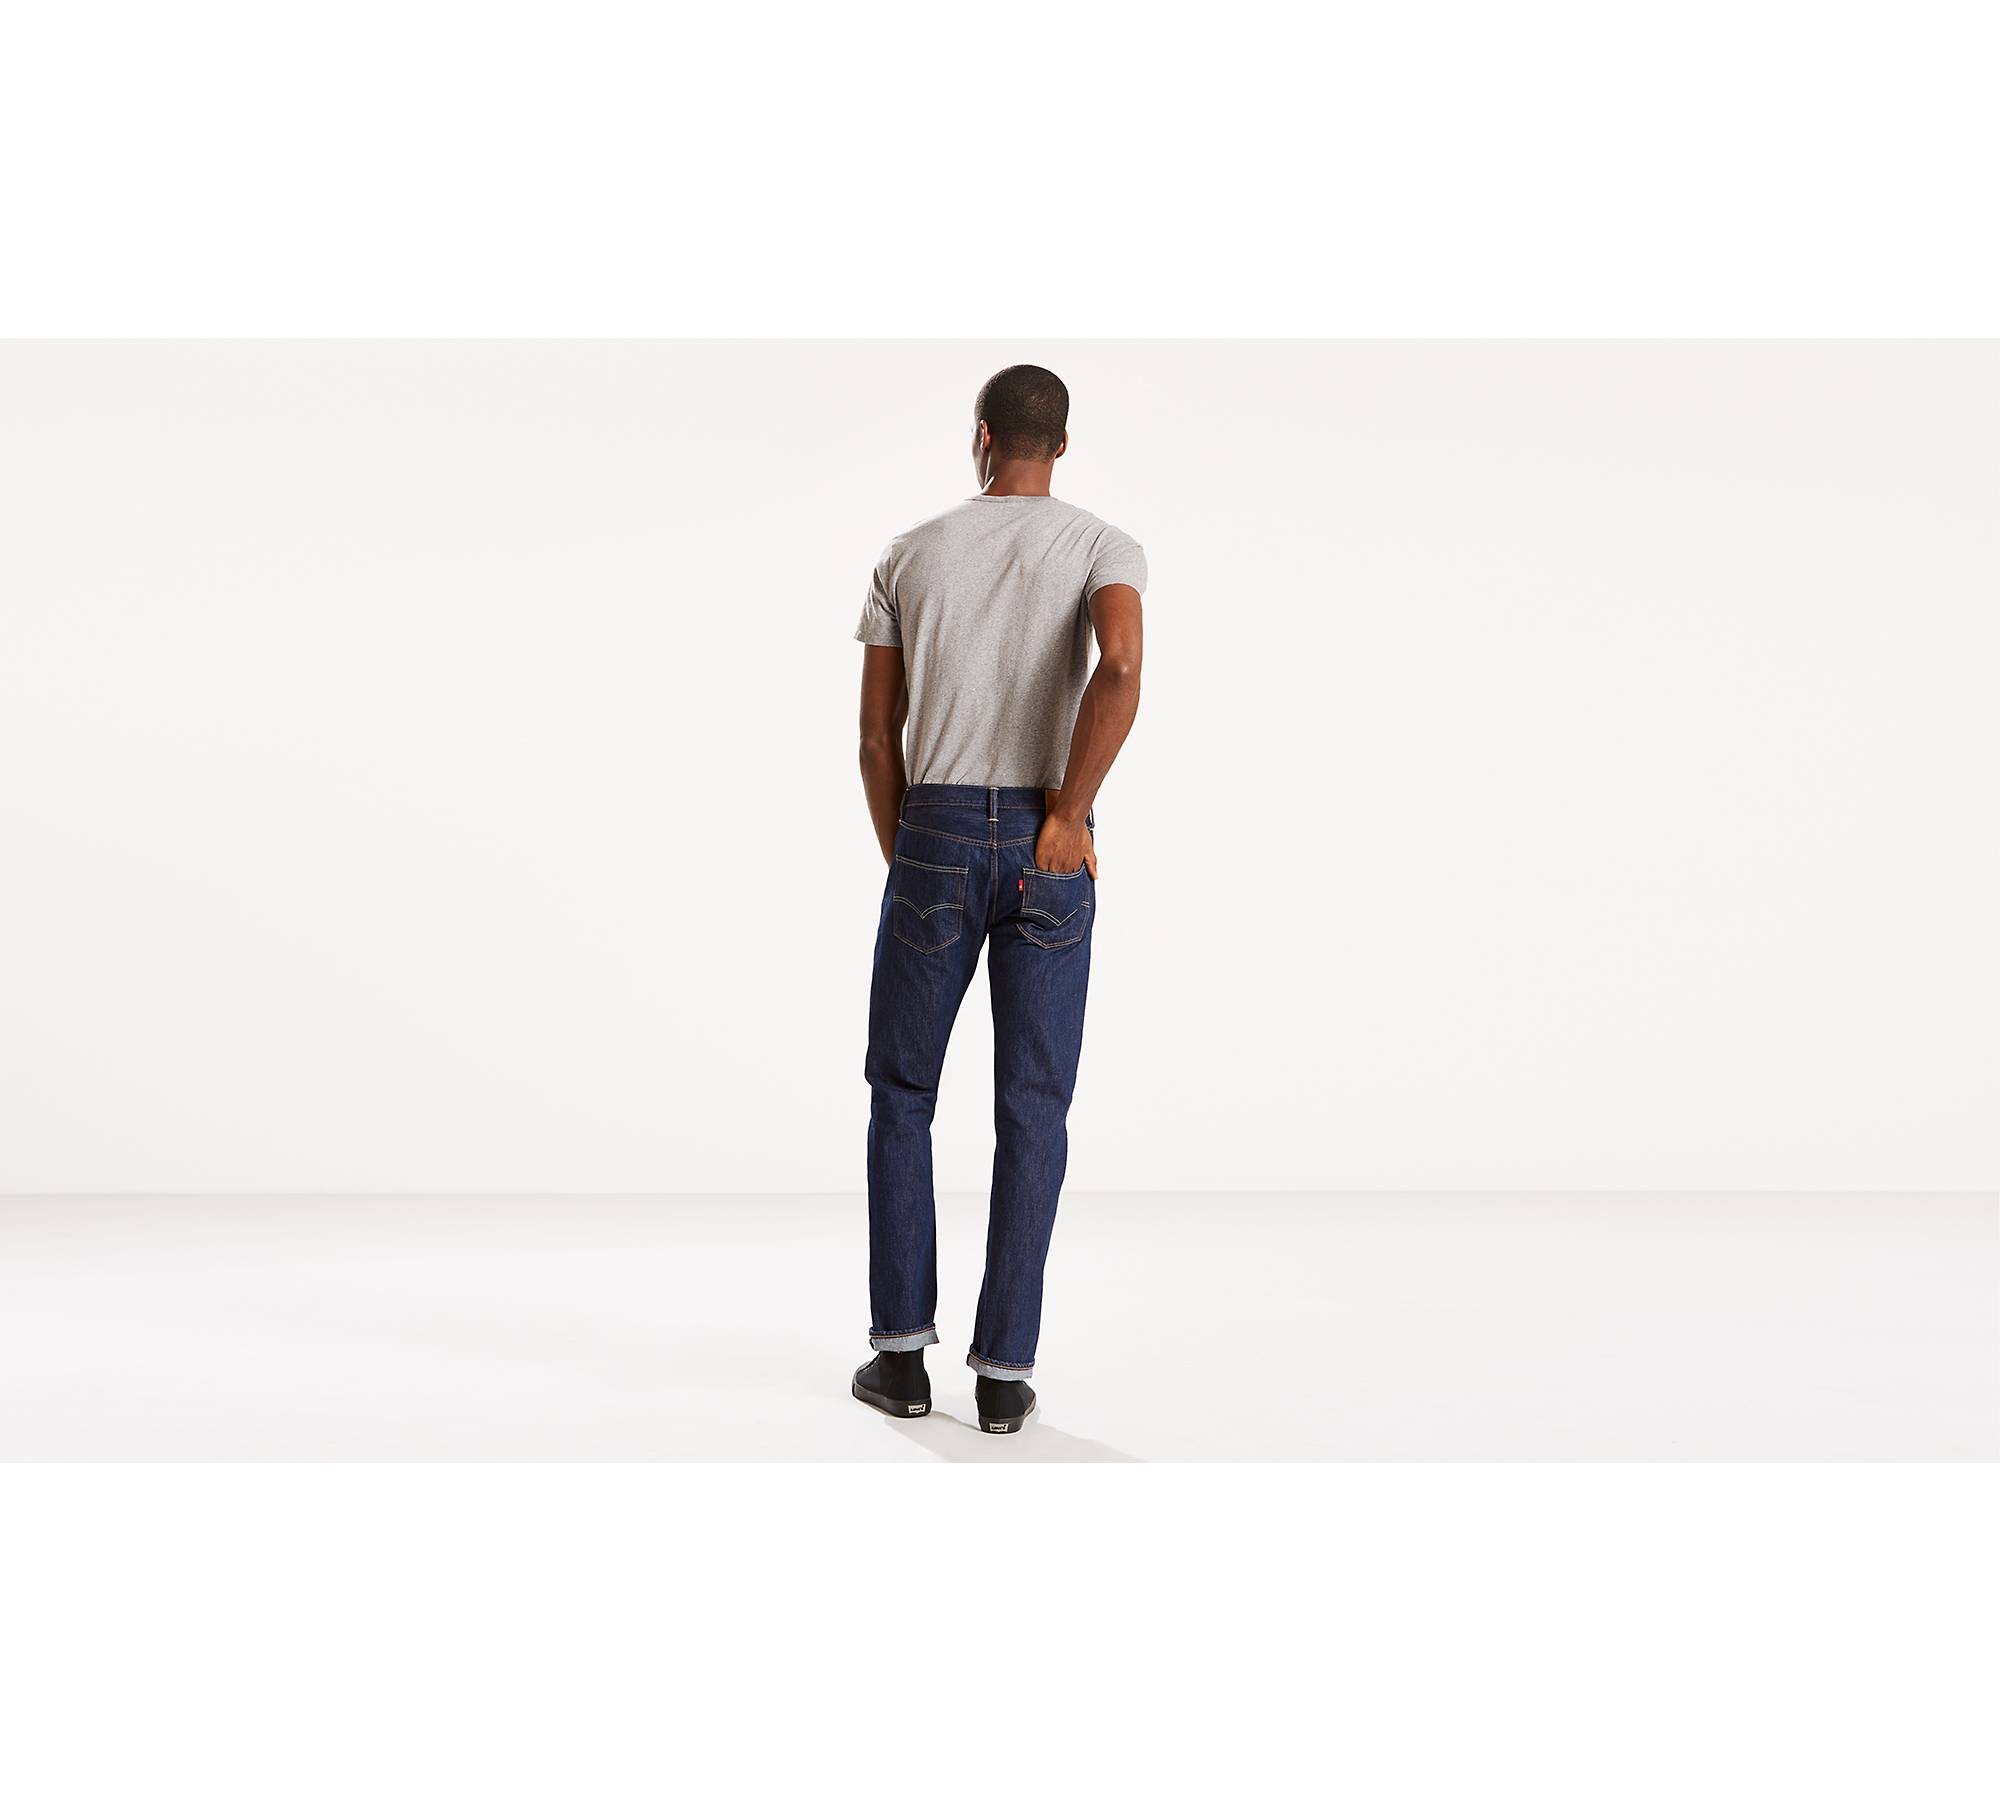 Levi's® Made in the USA 501® Original Fit Men's Jeans